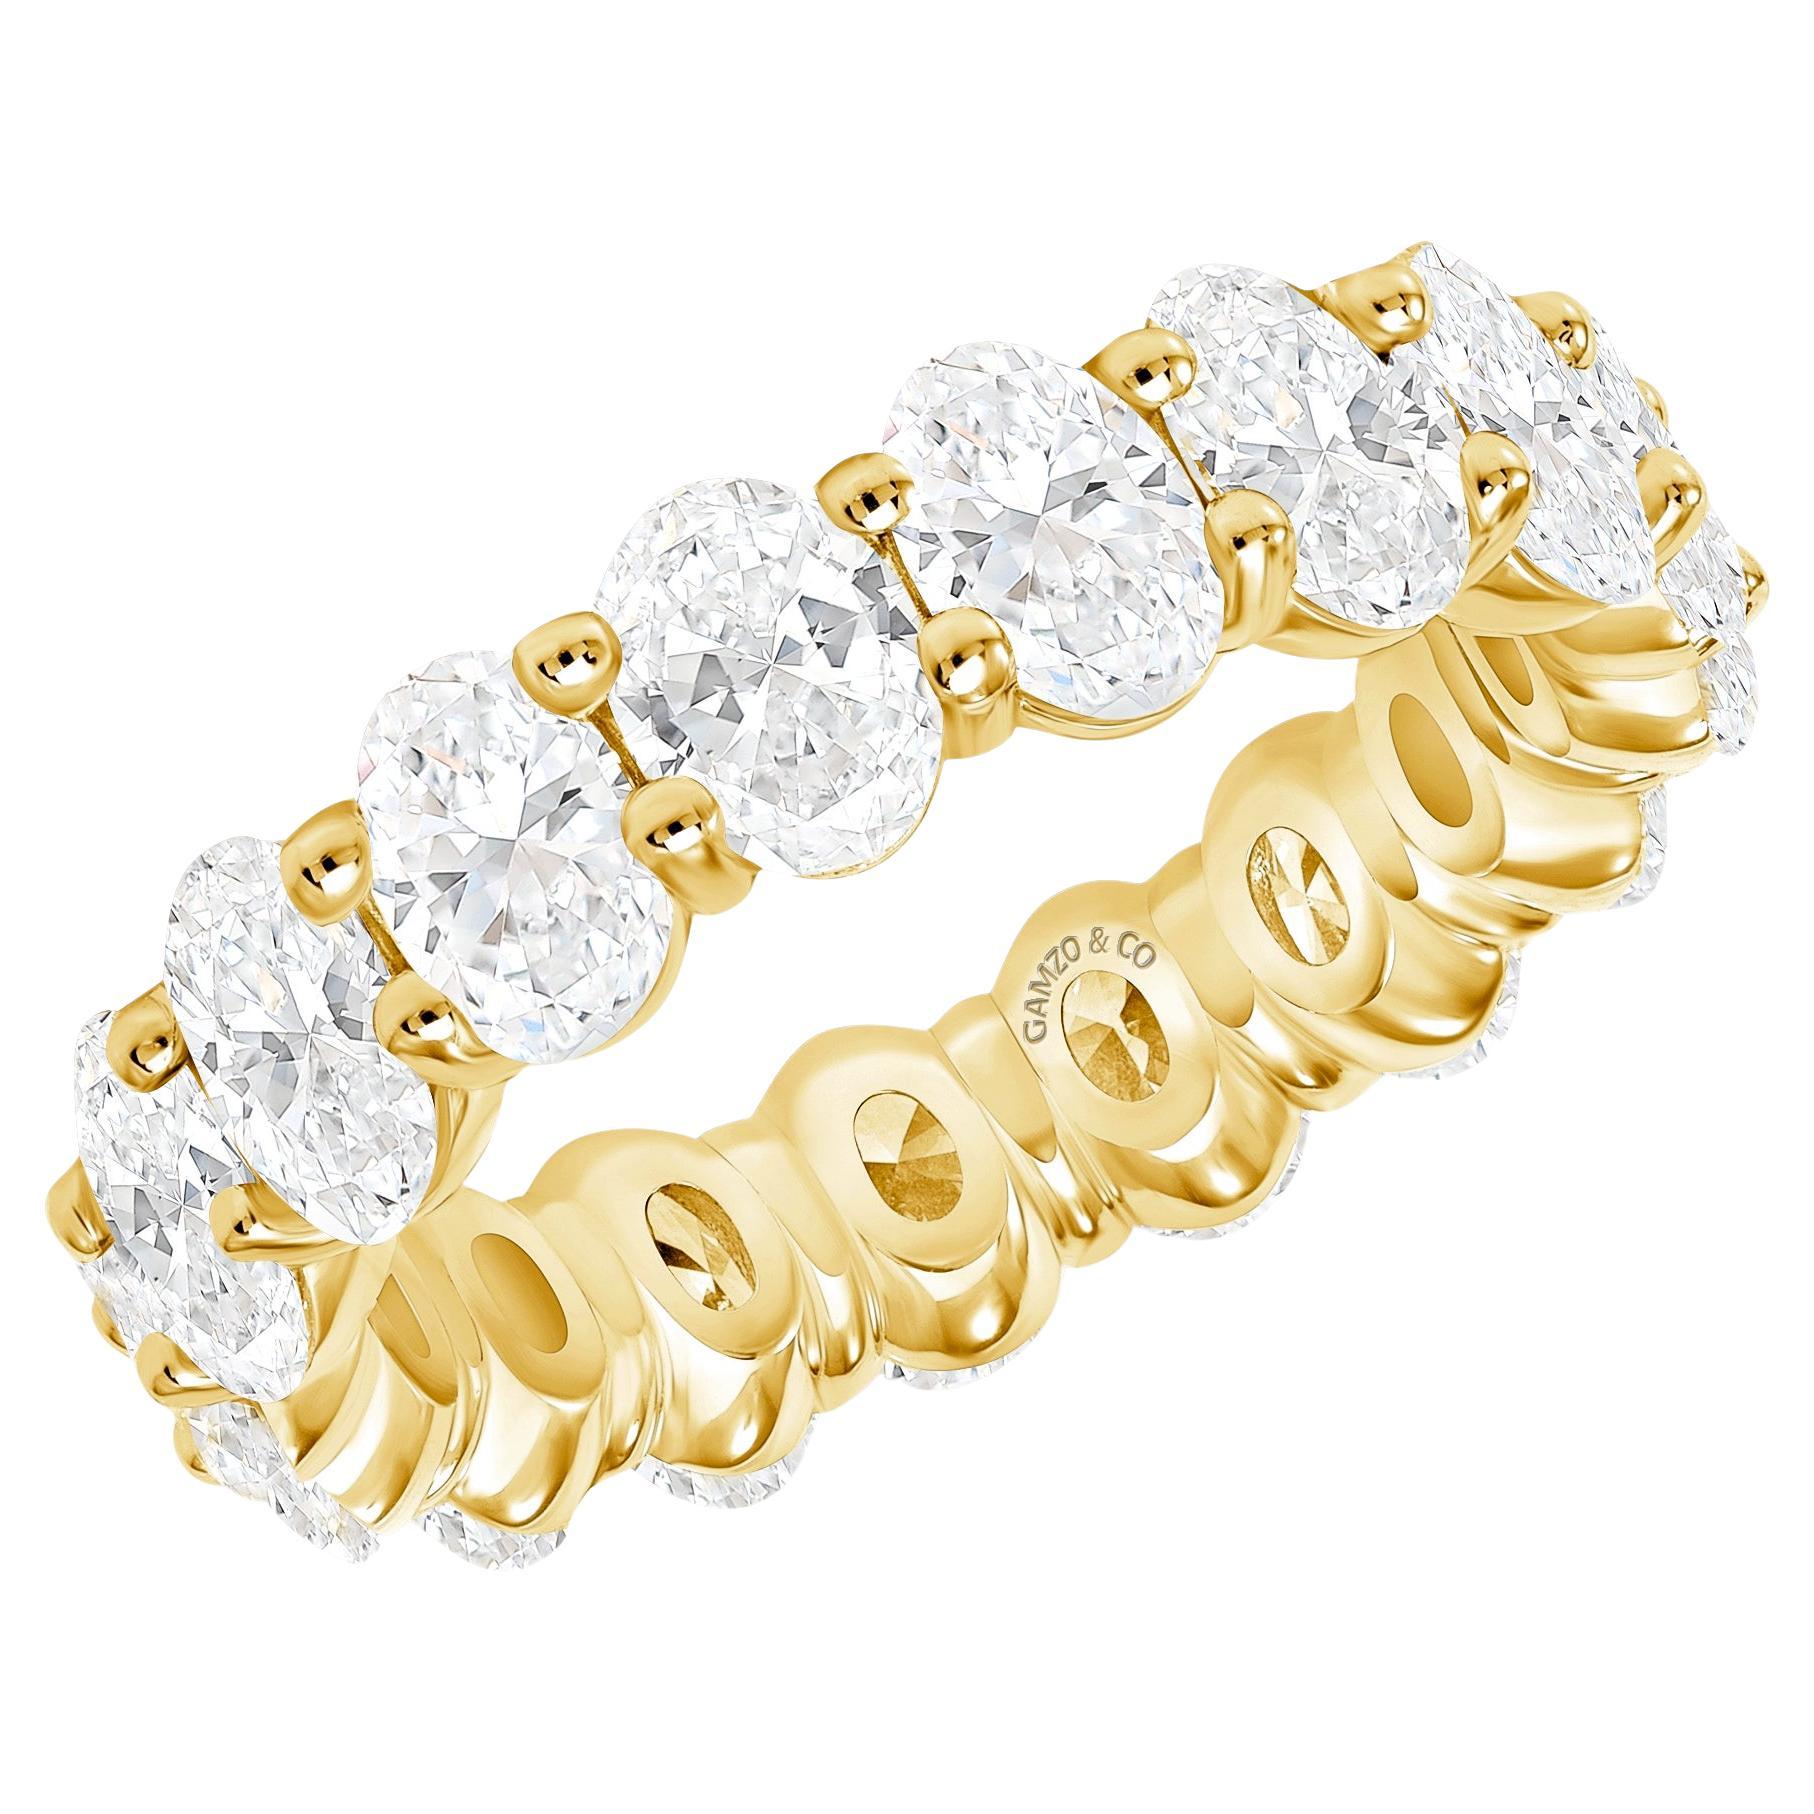 For Sale:  18k Yellow Gold 4 Carat Oval Cut Natural Diamond Eternity Ring